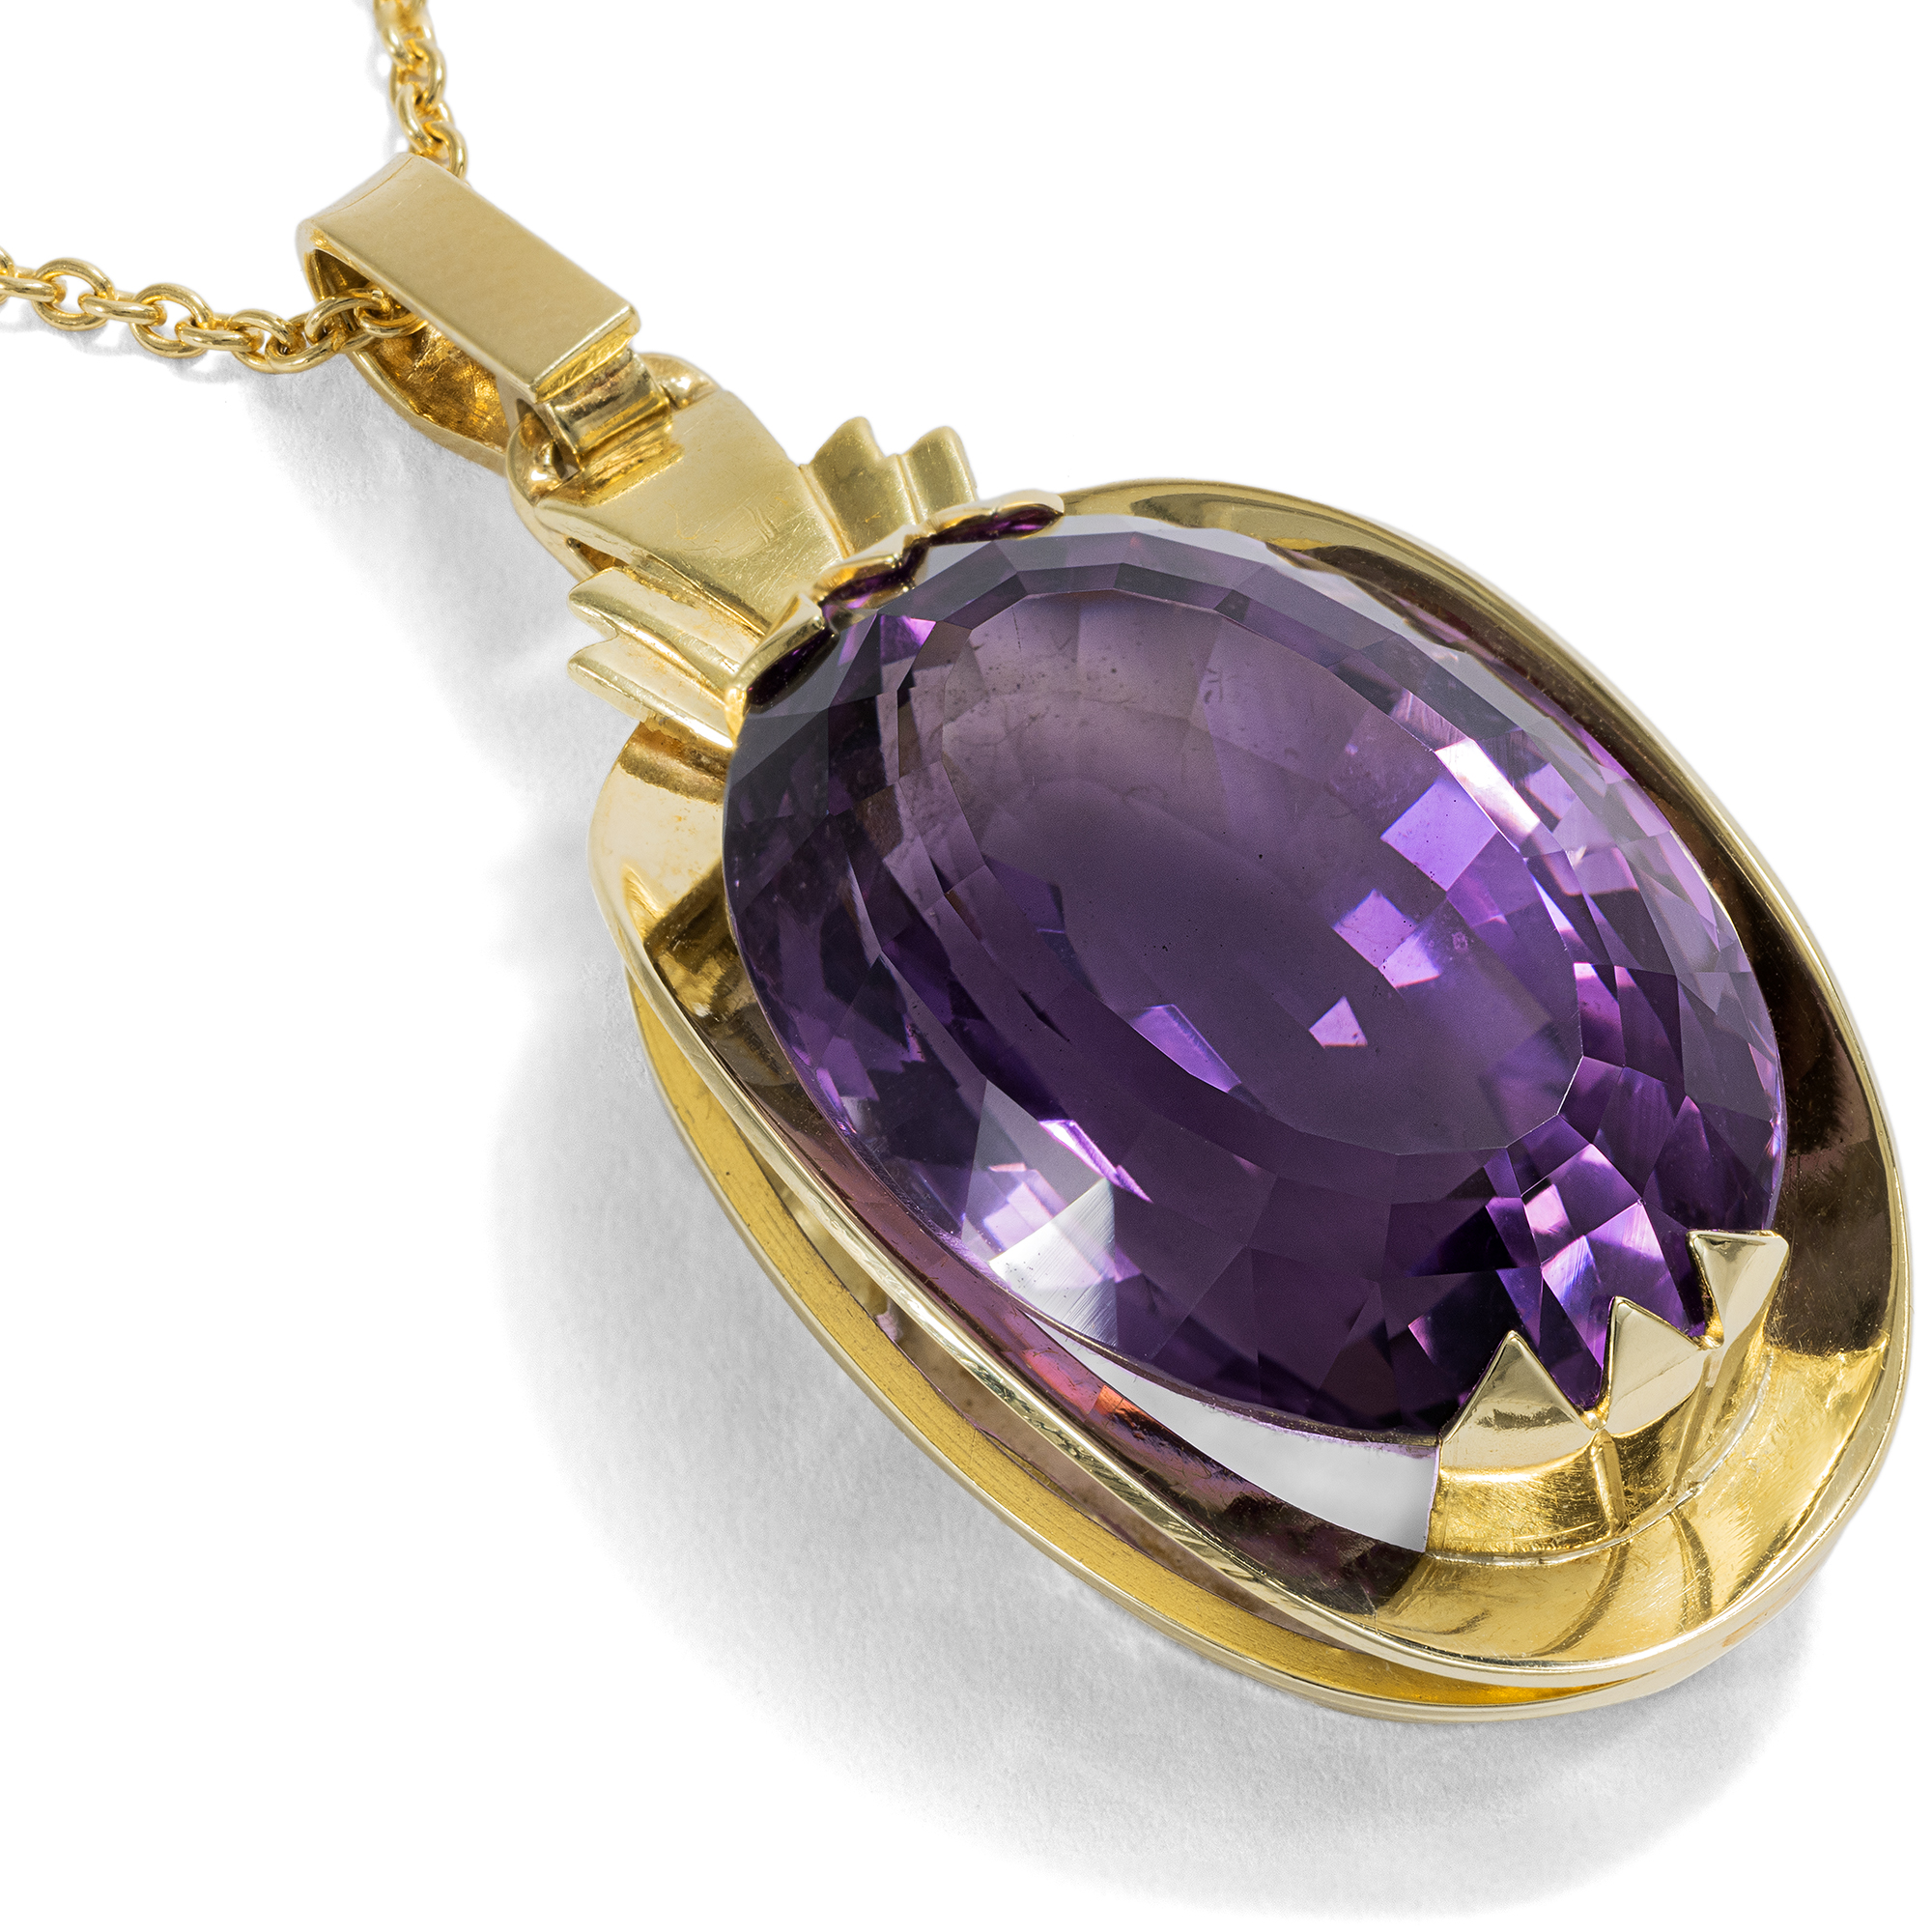 Beautiful Vintage Pendant With Amethyst in Gold on Chain, Circa 1960